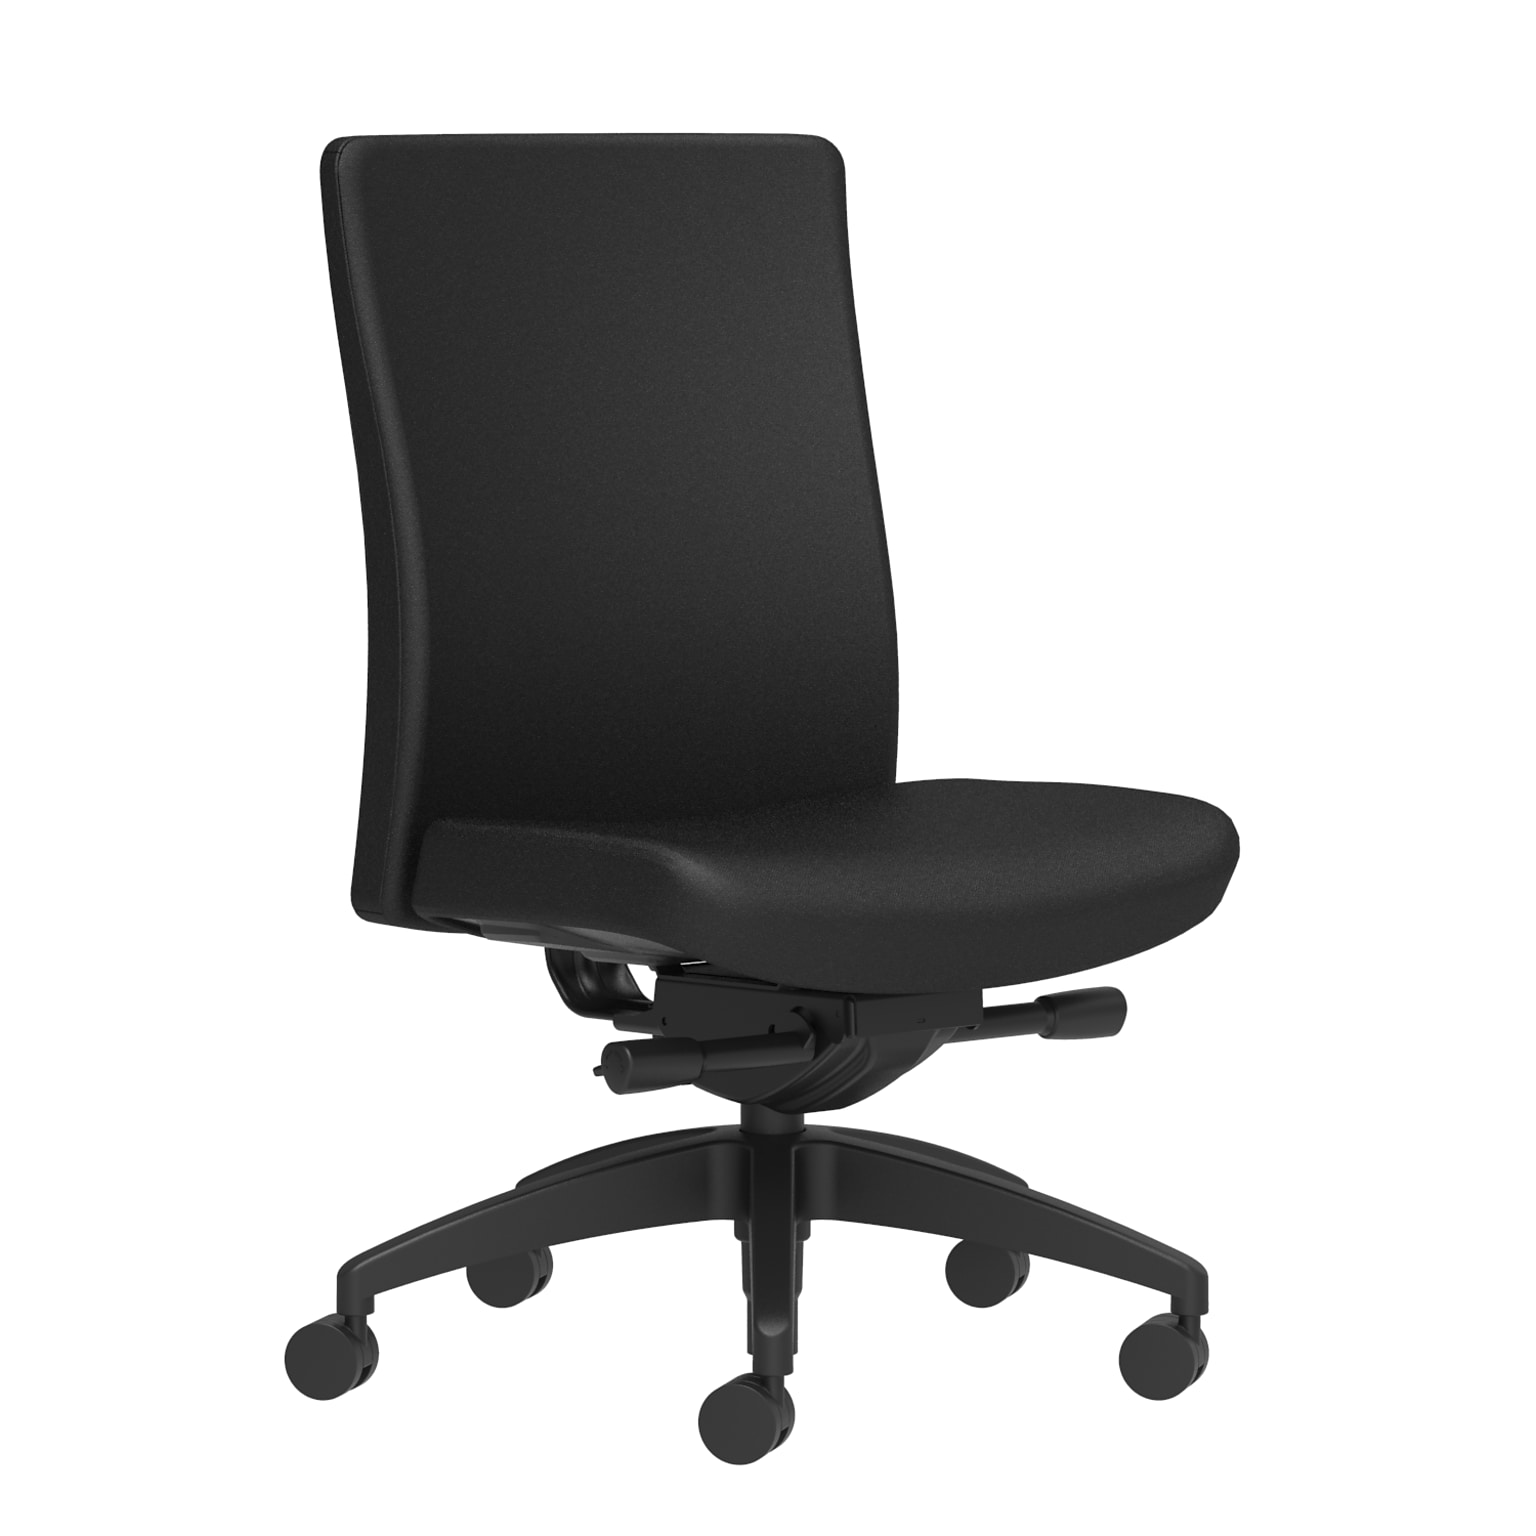 Union & Scale Workplace2.0™ Task Chair Upholstered, Armless, Black Fabric, Synchro Tilt Seat Slide (54198)